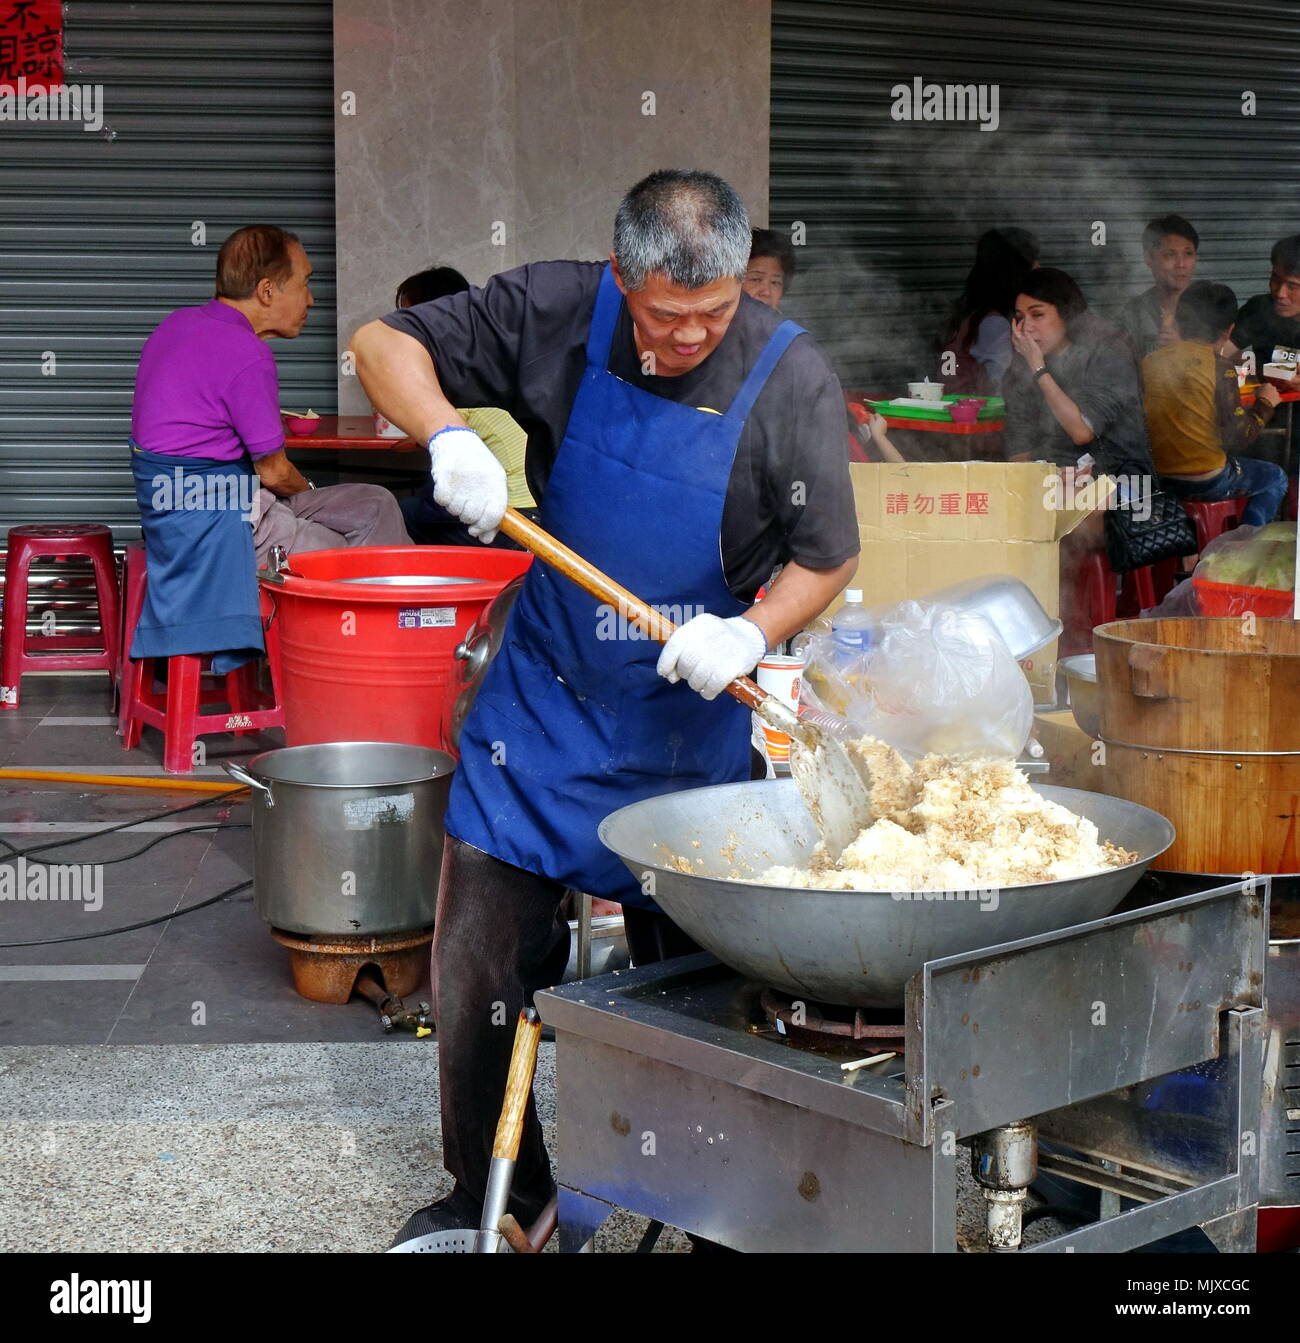 https://c8.alamy.com/comp/MJXCGC/kaohsiung-taiwan-february-17-2018-a-man-at-an-outdoor-food-stall-cooks-fried-rice-in-a-large-wok-MJXCGC.jpg